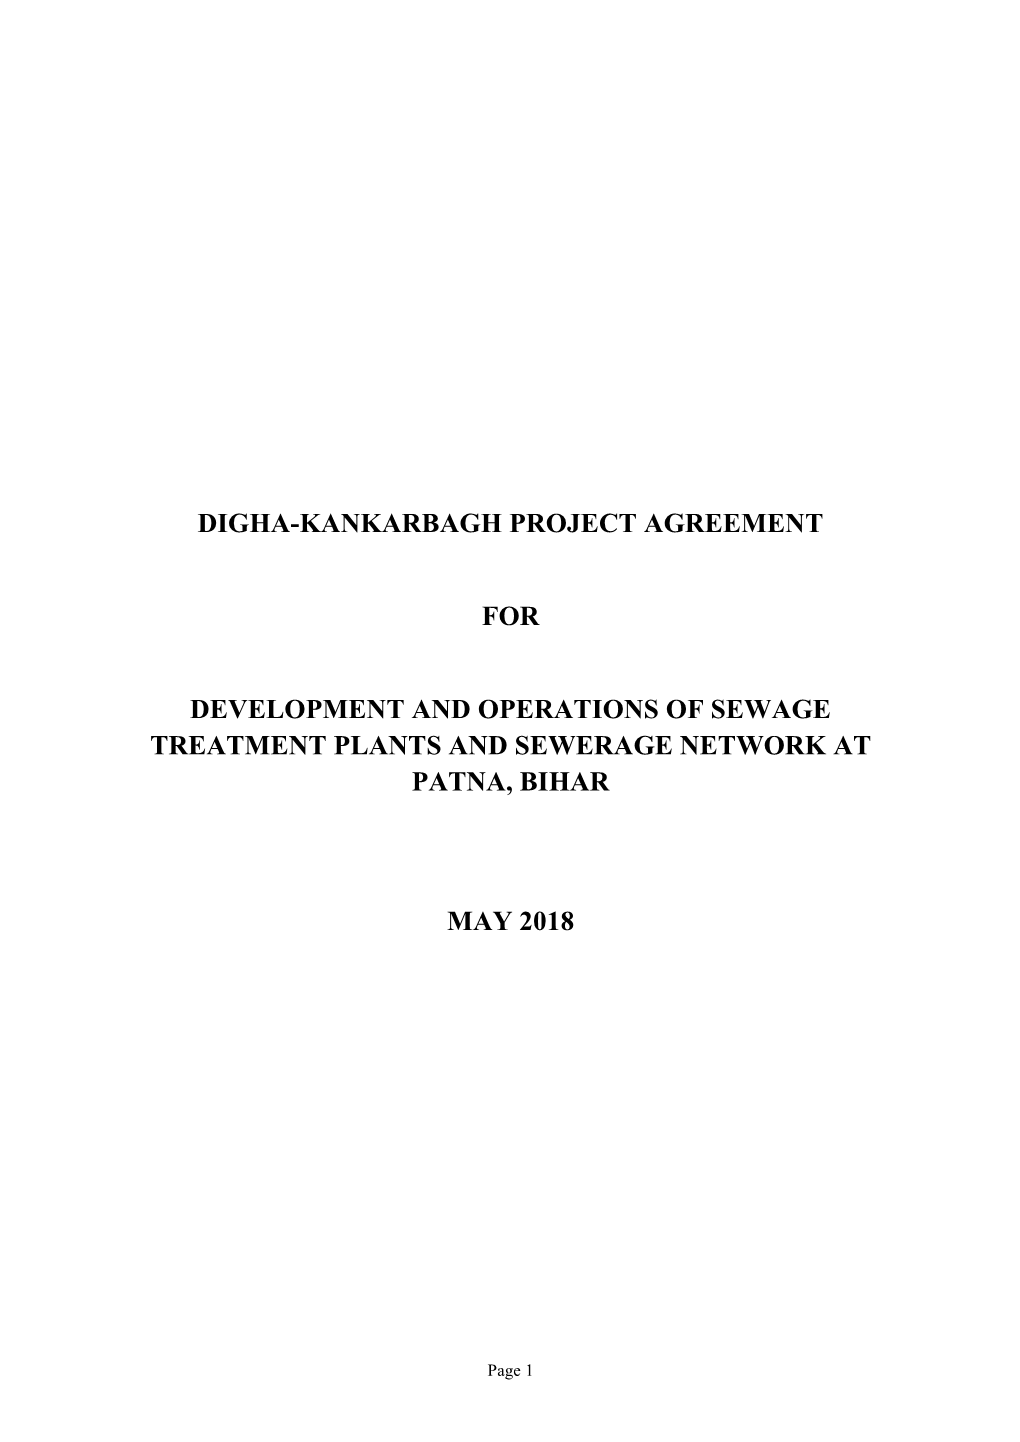 Digha-Kankarbagh Project Agreement For